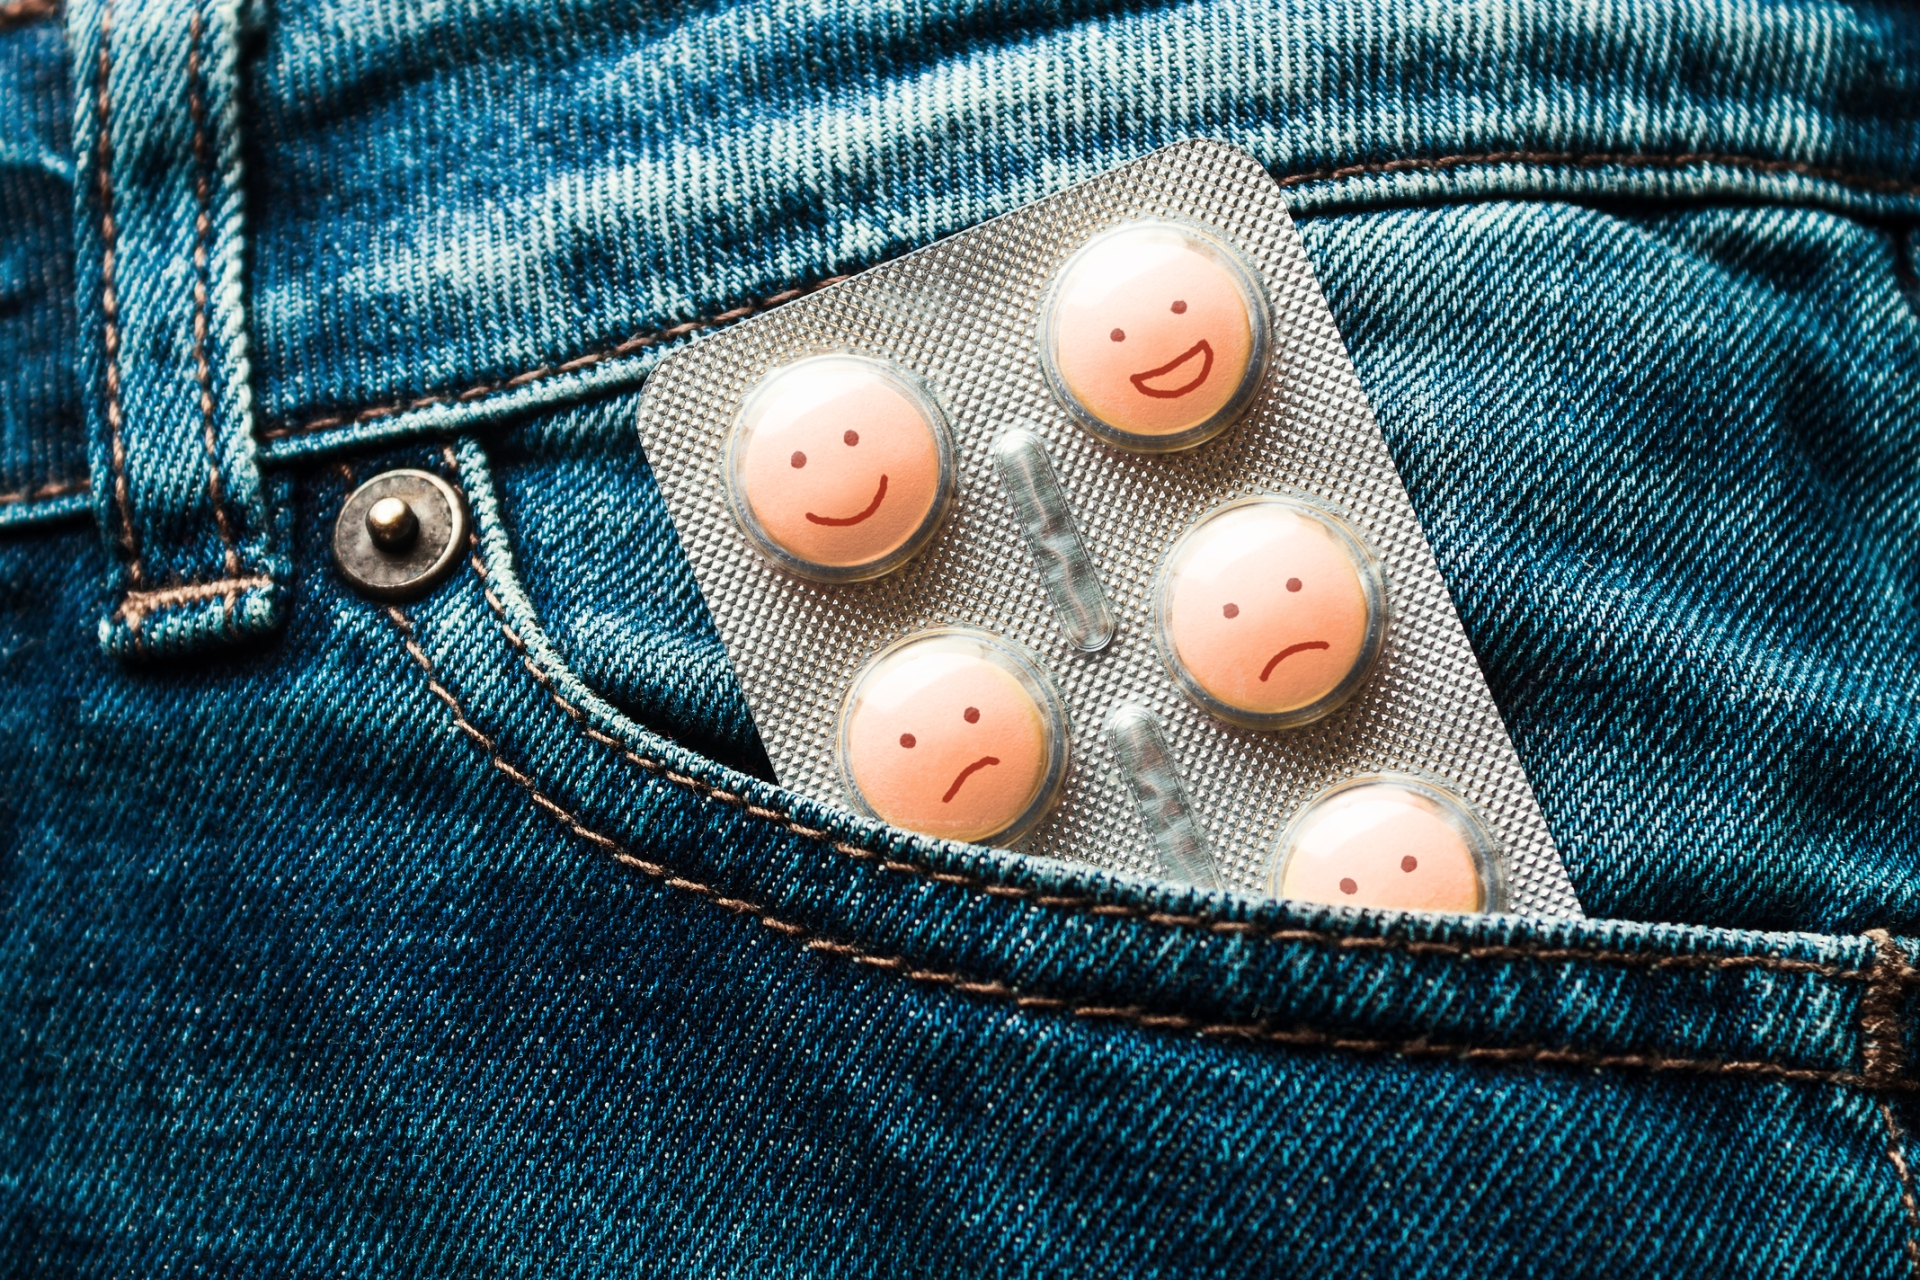 Common signs that antidepressants aren't working in the way they should